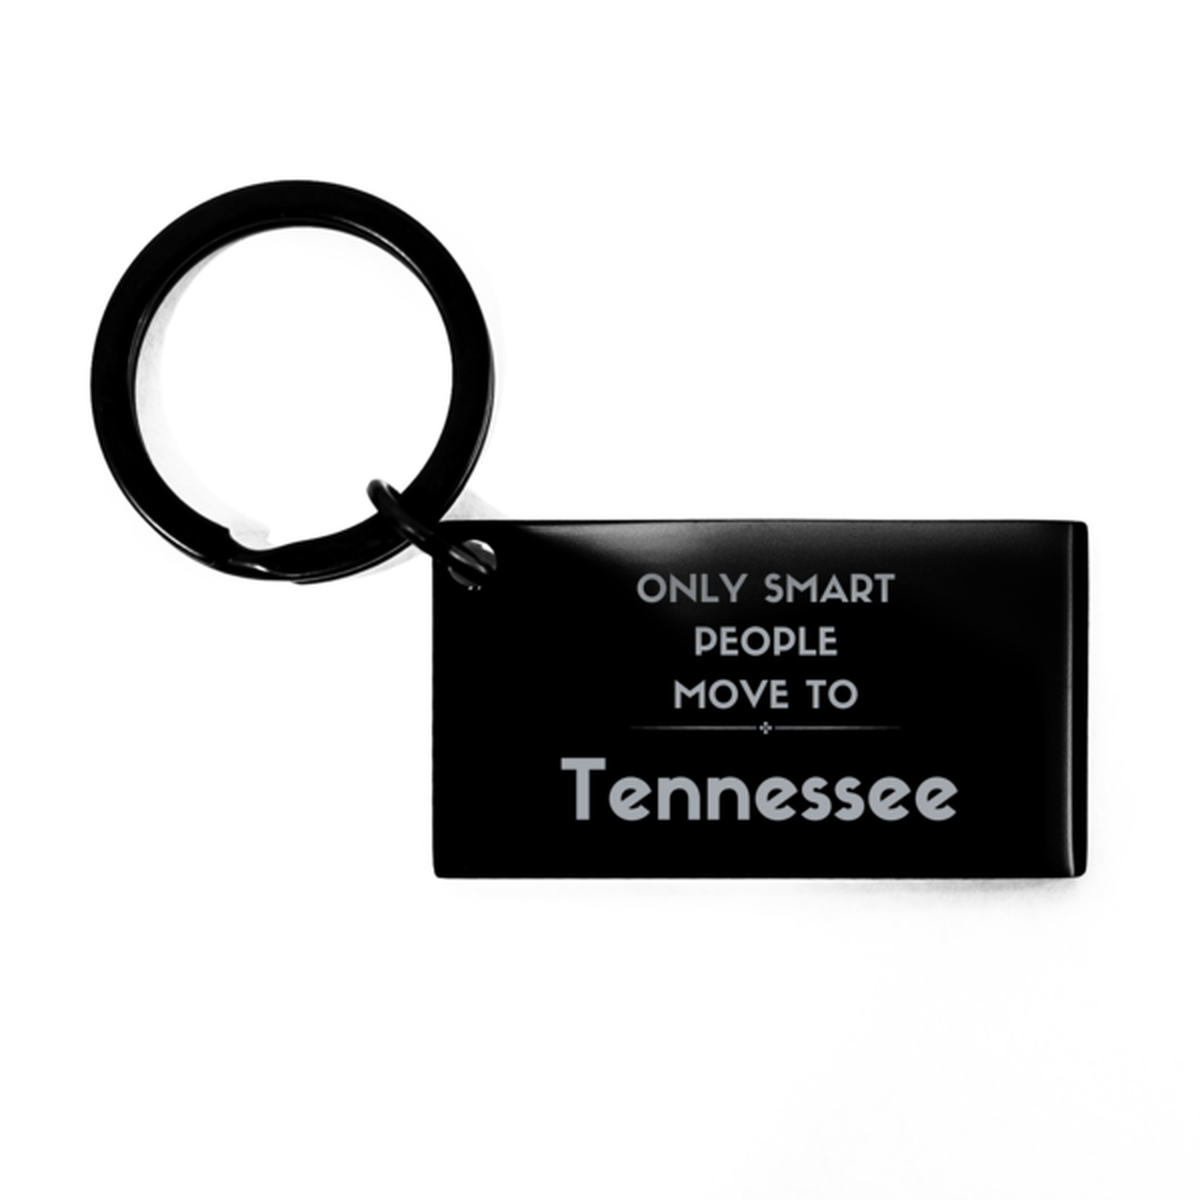 Only smart people move to Tennessee Keychain, Gag Gifts For Tennessee, Move to Tennessee Gifts for Friends Coworker Funny Saying Quote